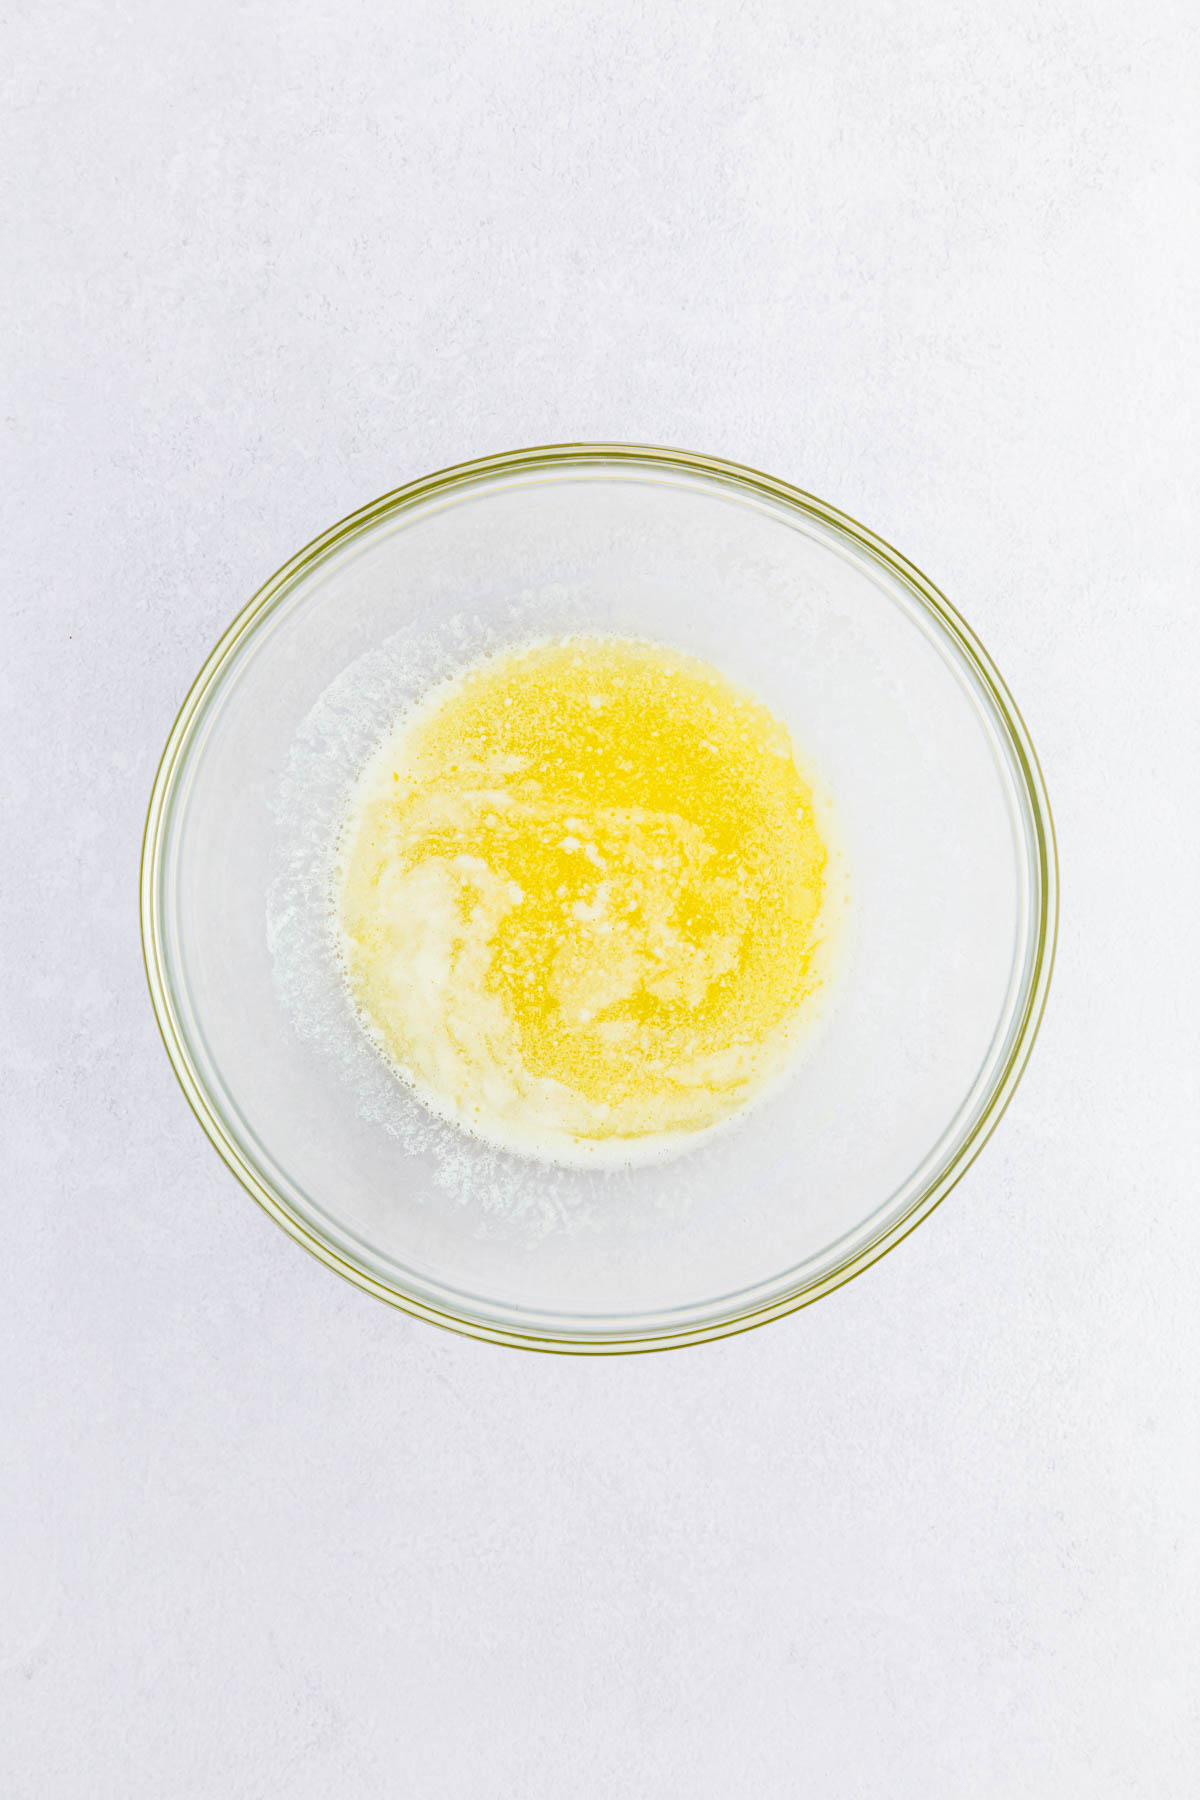 Butter in glass mixing bowl